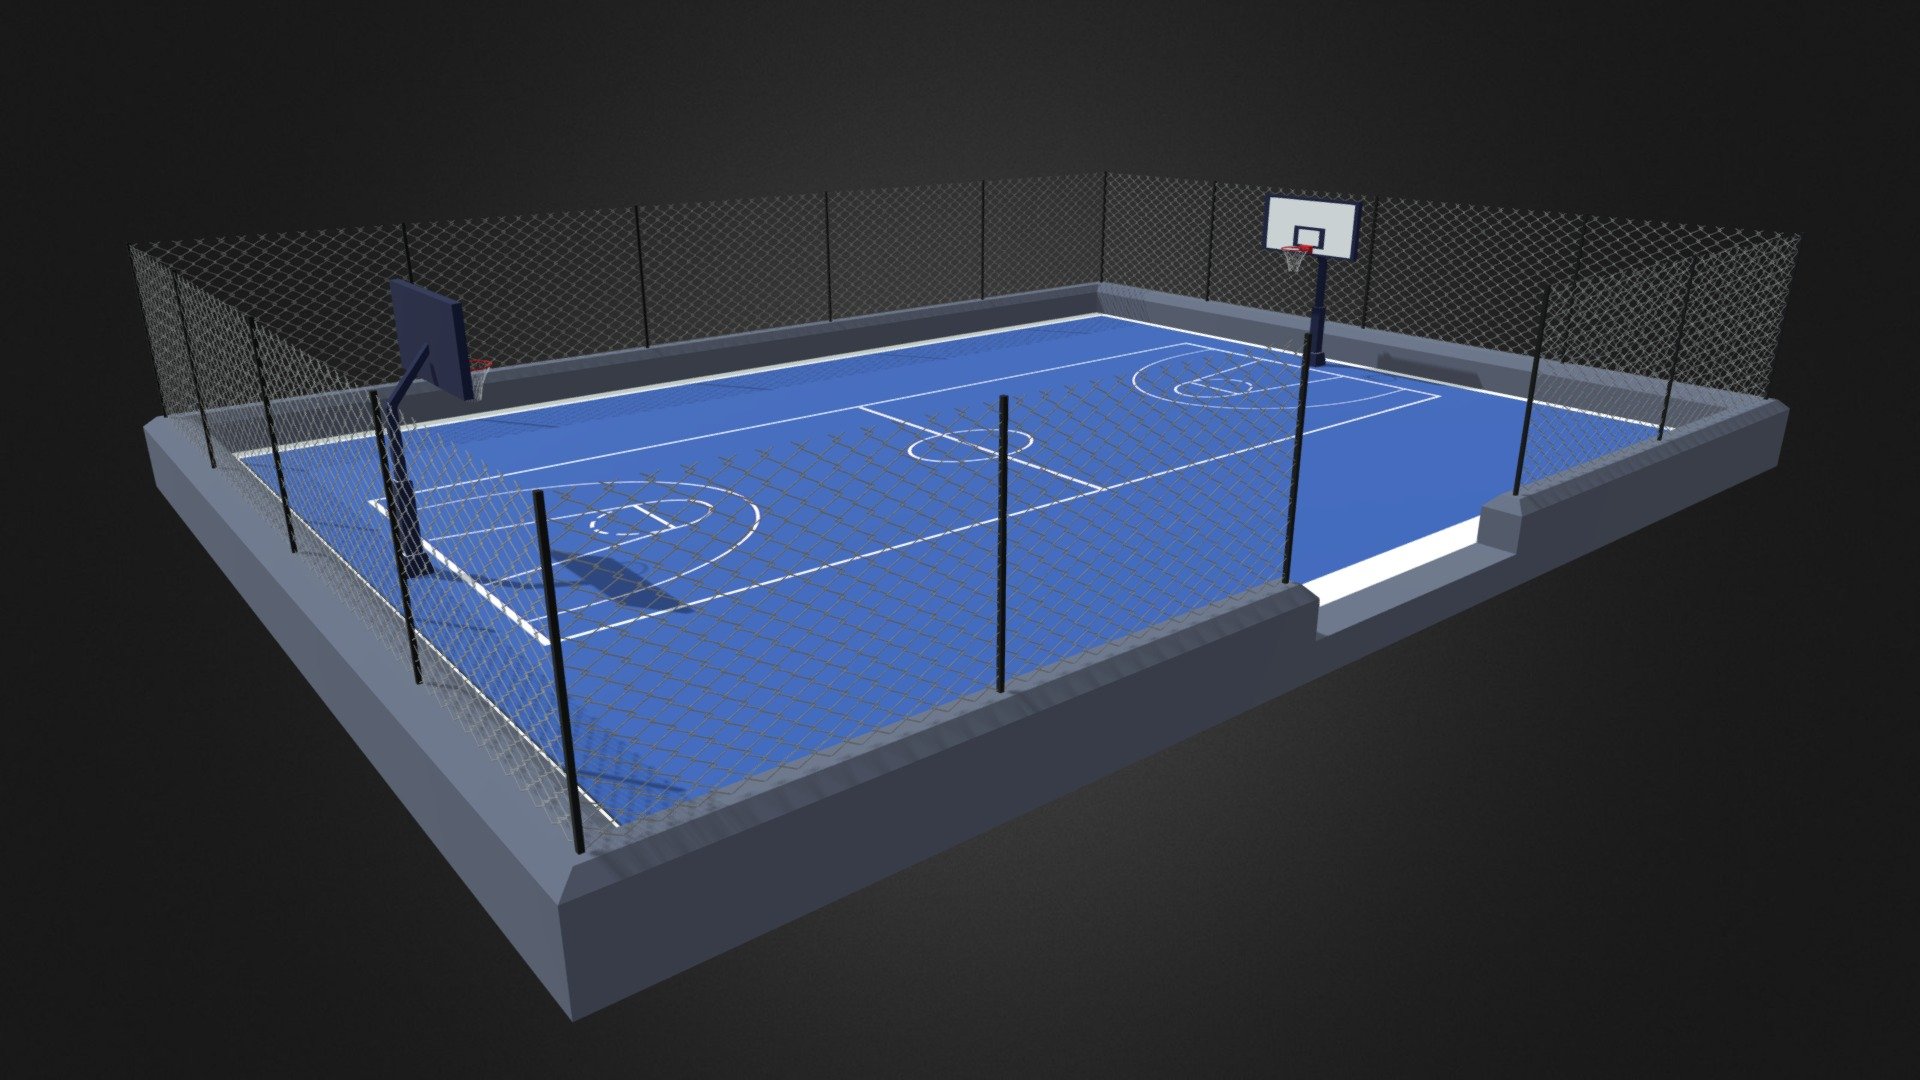 Basketball Court

The model was created in Blender3D.
The texture of the court was created in Photoshop, from a similar reference 3d model